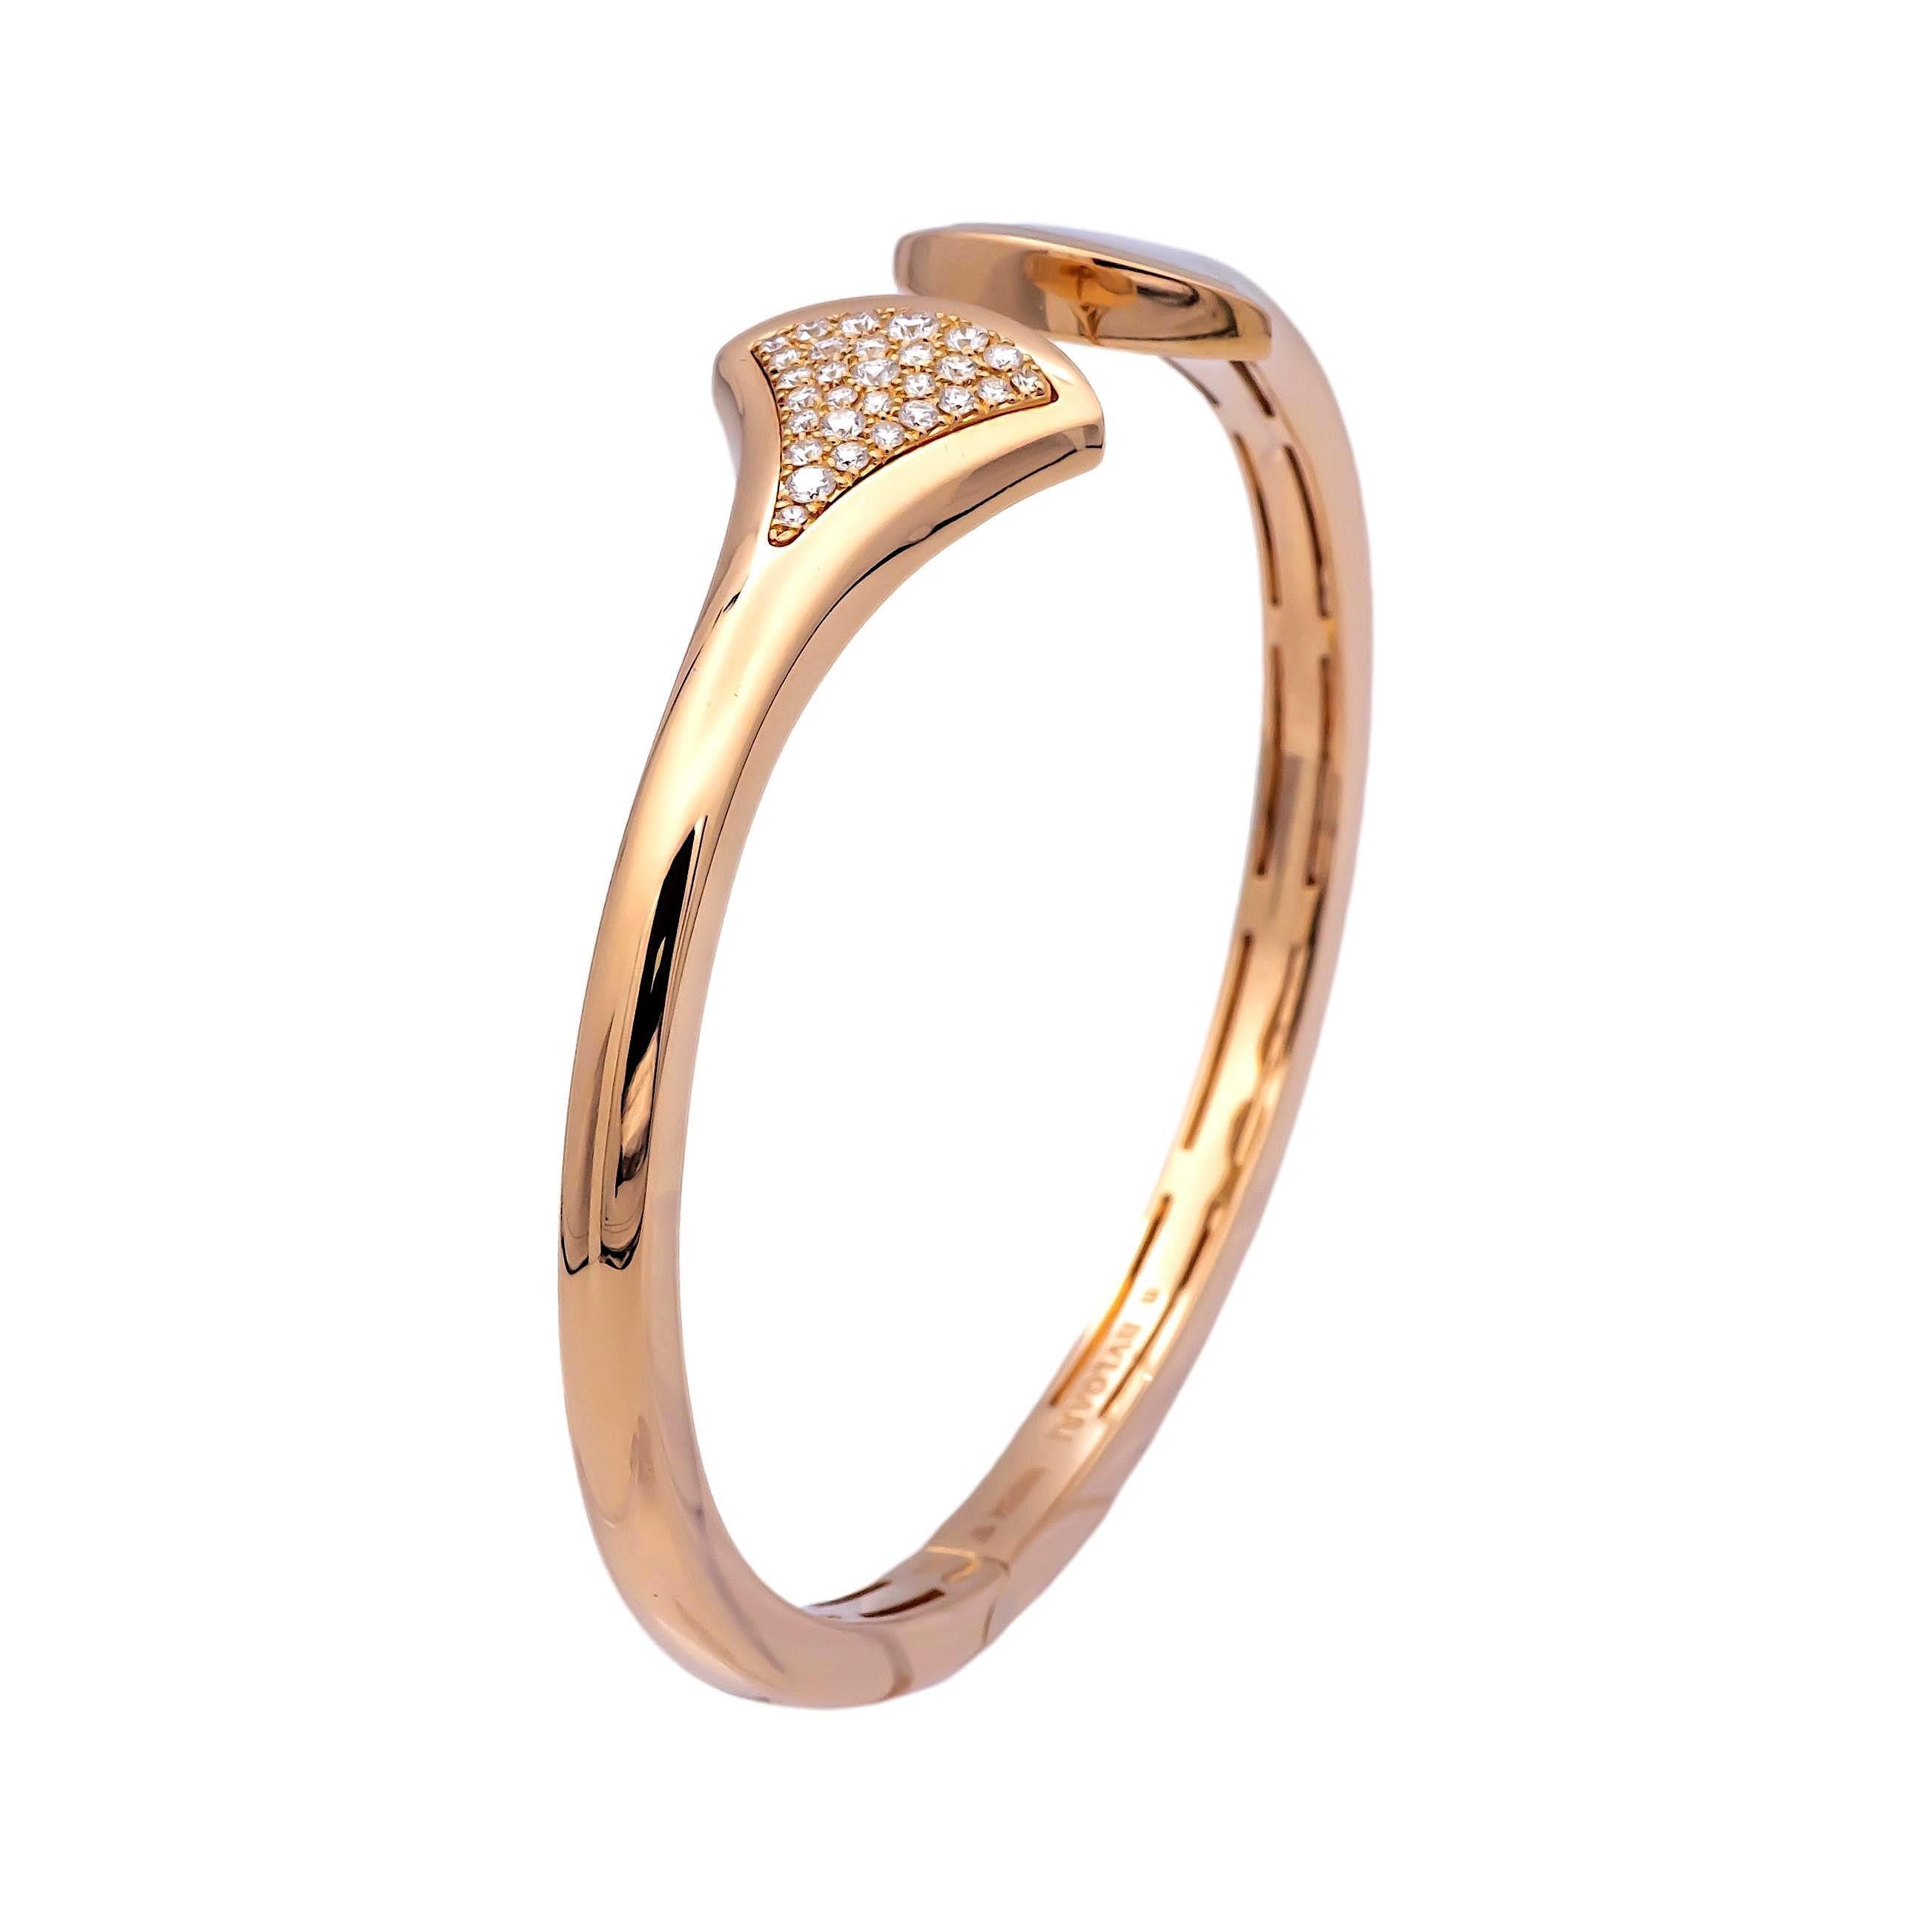 Bvlgari open cuff bracelet from the Diva's dream collection finely crafted in 18K rose gold featuring one section of mother of pearl inlay and another section of 29 micro pave set round brilliant cut diamonds weighing 0.16 carats total weight